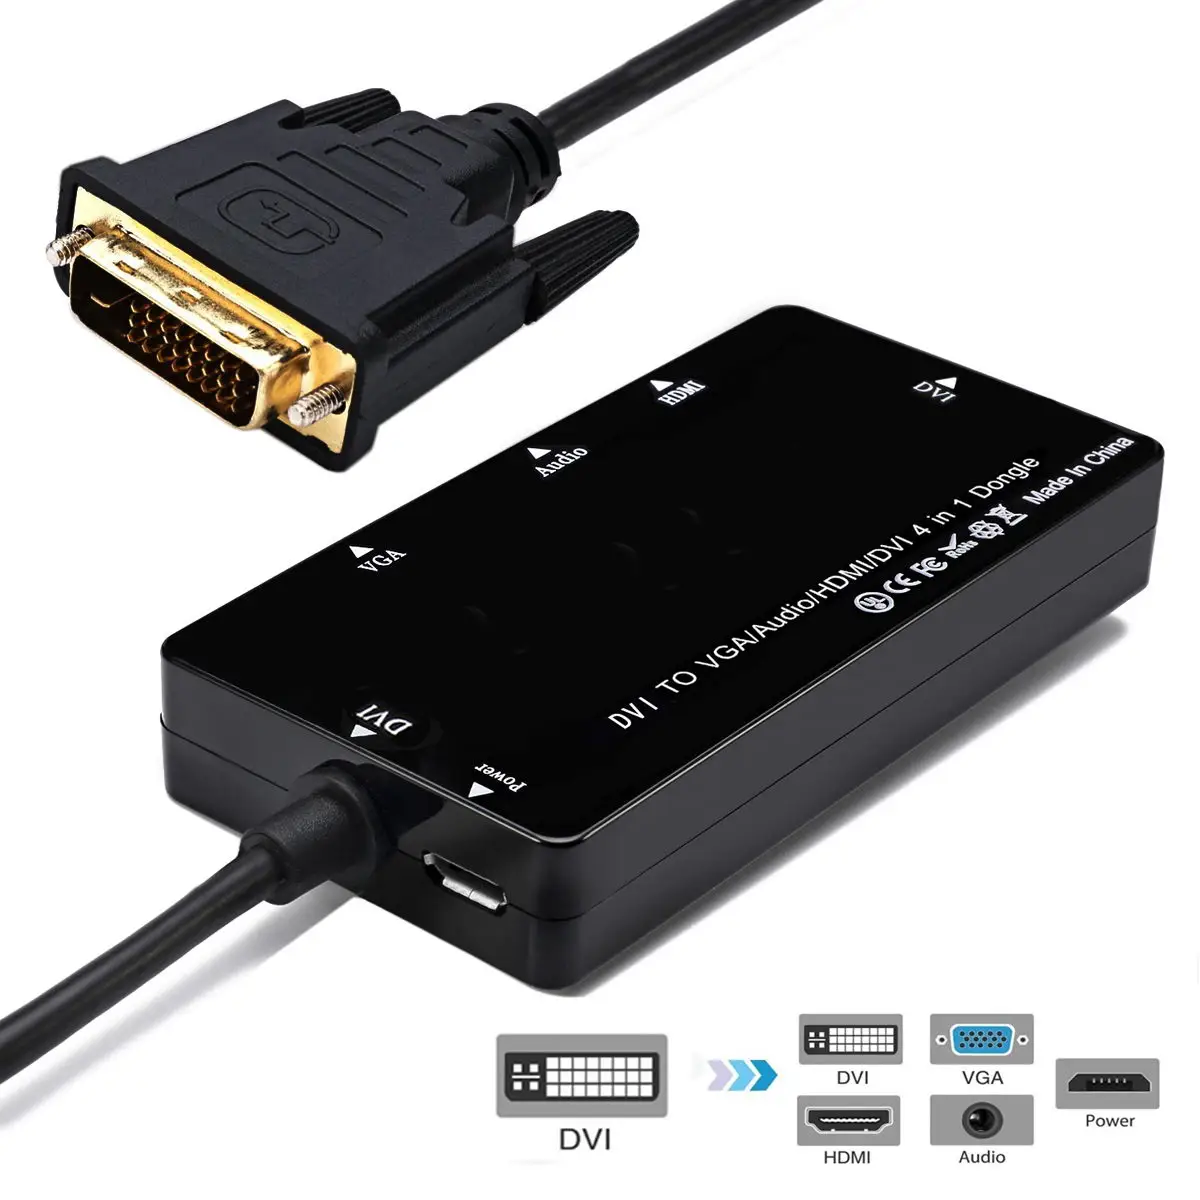 

CY Chenyang DVI to VGA/Audio/HDMI-compatible/DVI 4in1 Dongle Adapter Multiport Splitter Converter For HDTV PC Monitor Projector